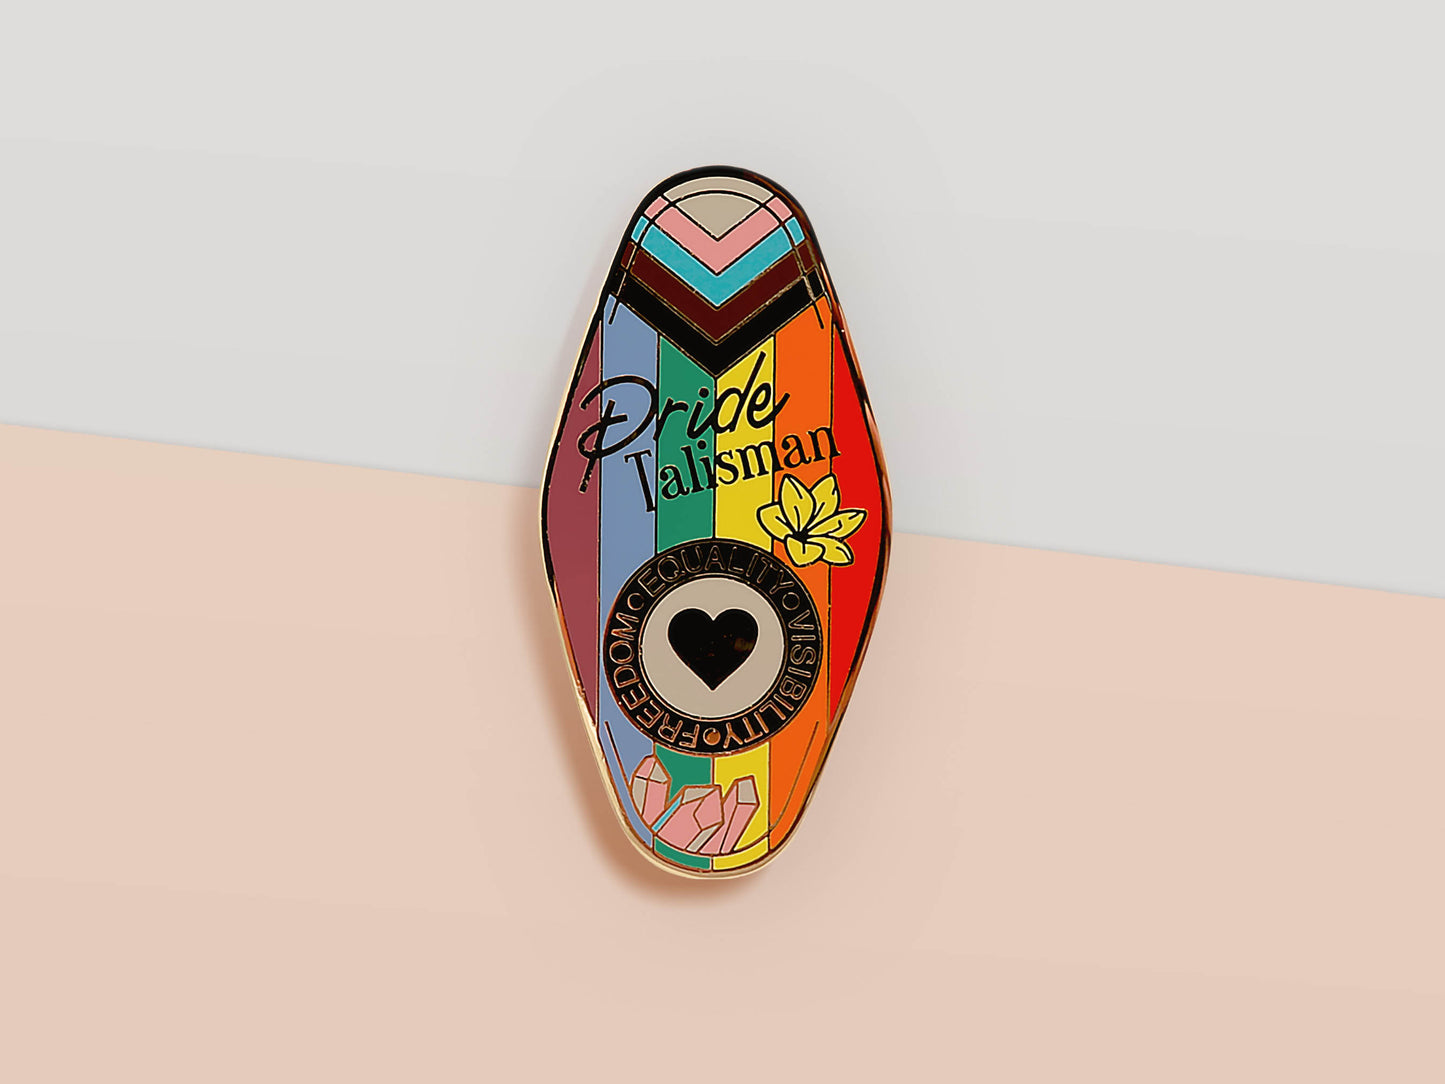 Gold Enamel Talisman Pin with progress pride flag design and the words Pride Talisman, Freedom Equality Visibility. The pins design includes a heart, flowers and crystals.